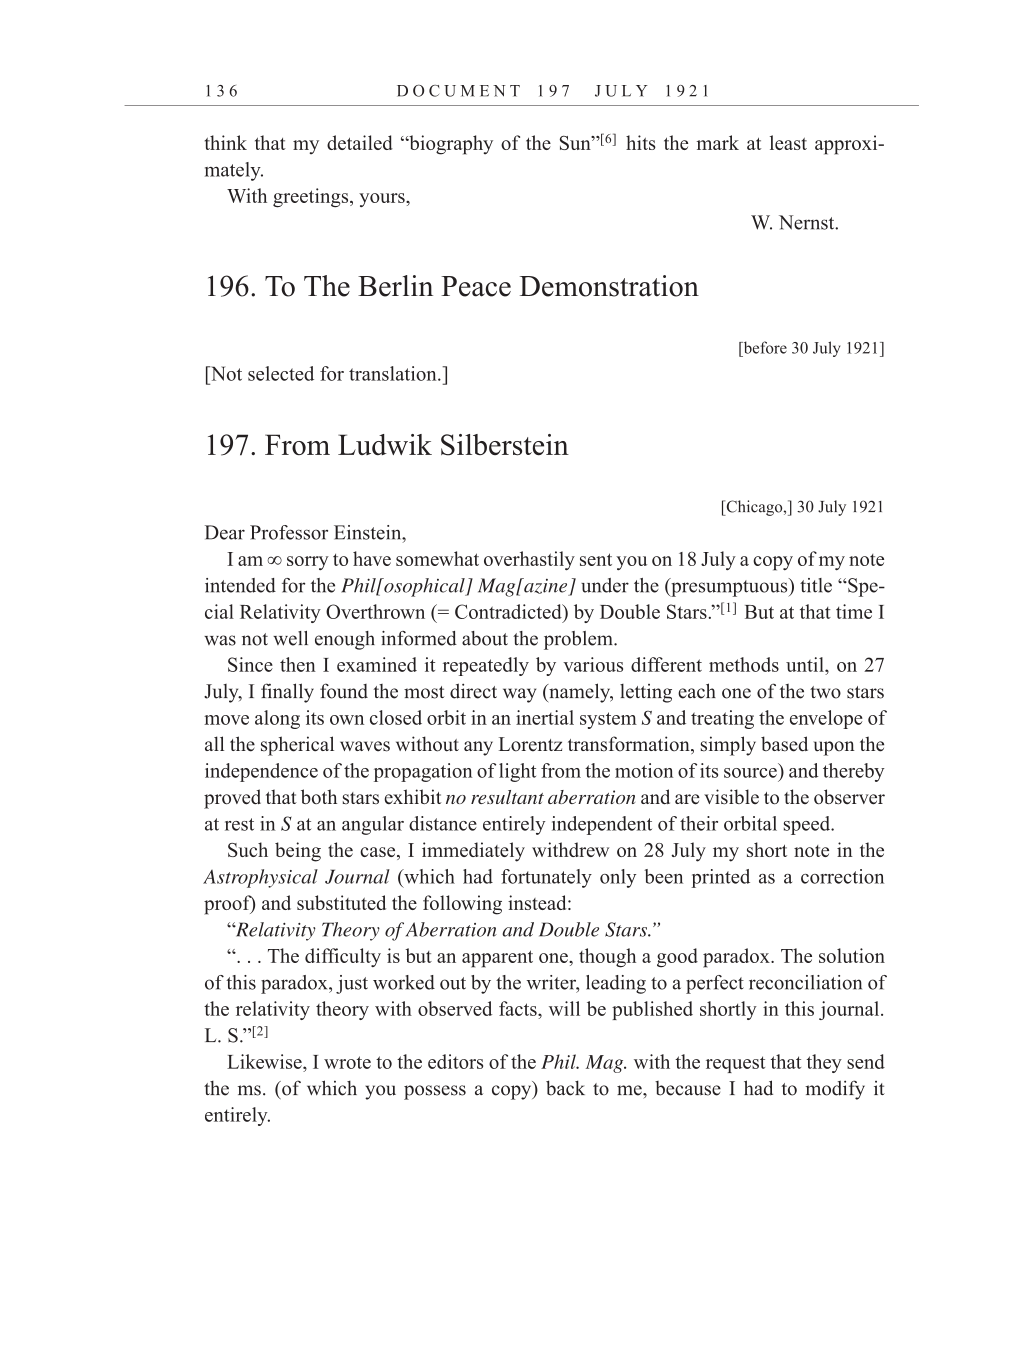 Volume 12: The Berlin Years: Correspondence, January-December 1921 (English translation supplement) page 136